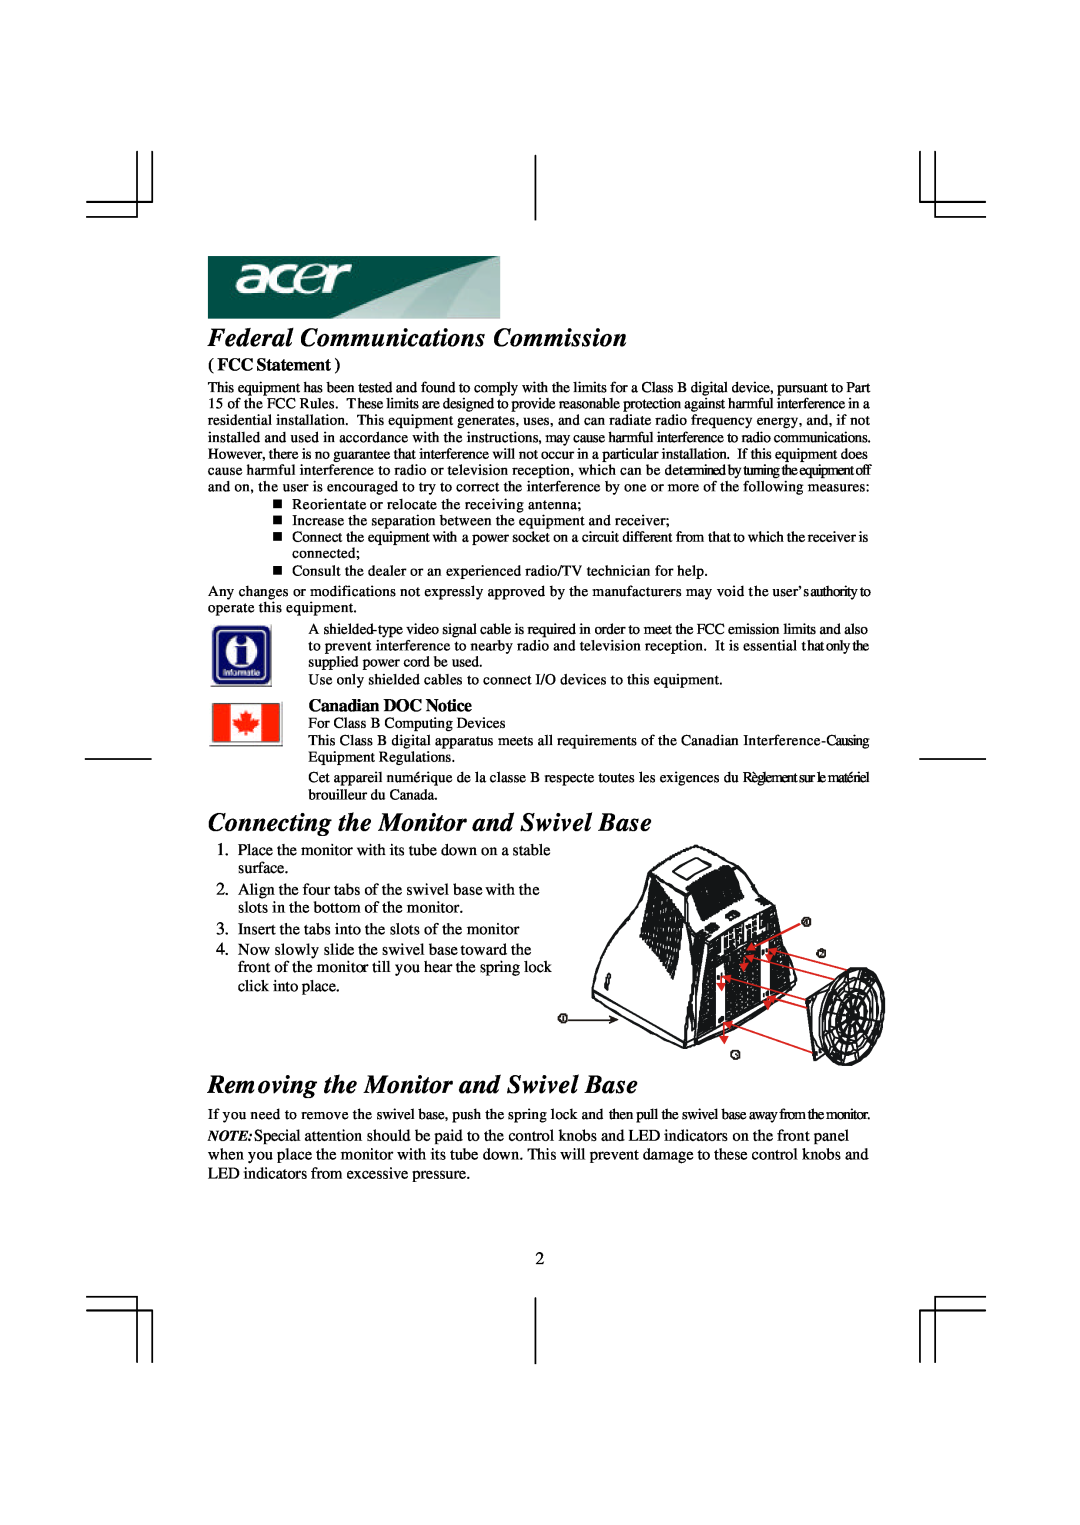 Acer AC 711 Federal Communications Commission, Connecting the Monitor and Swivel Base, FCC Statement, Canadian DOC Notice 